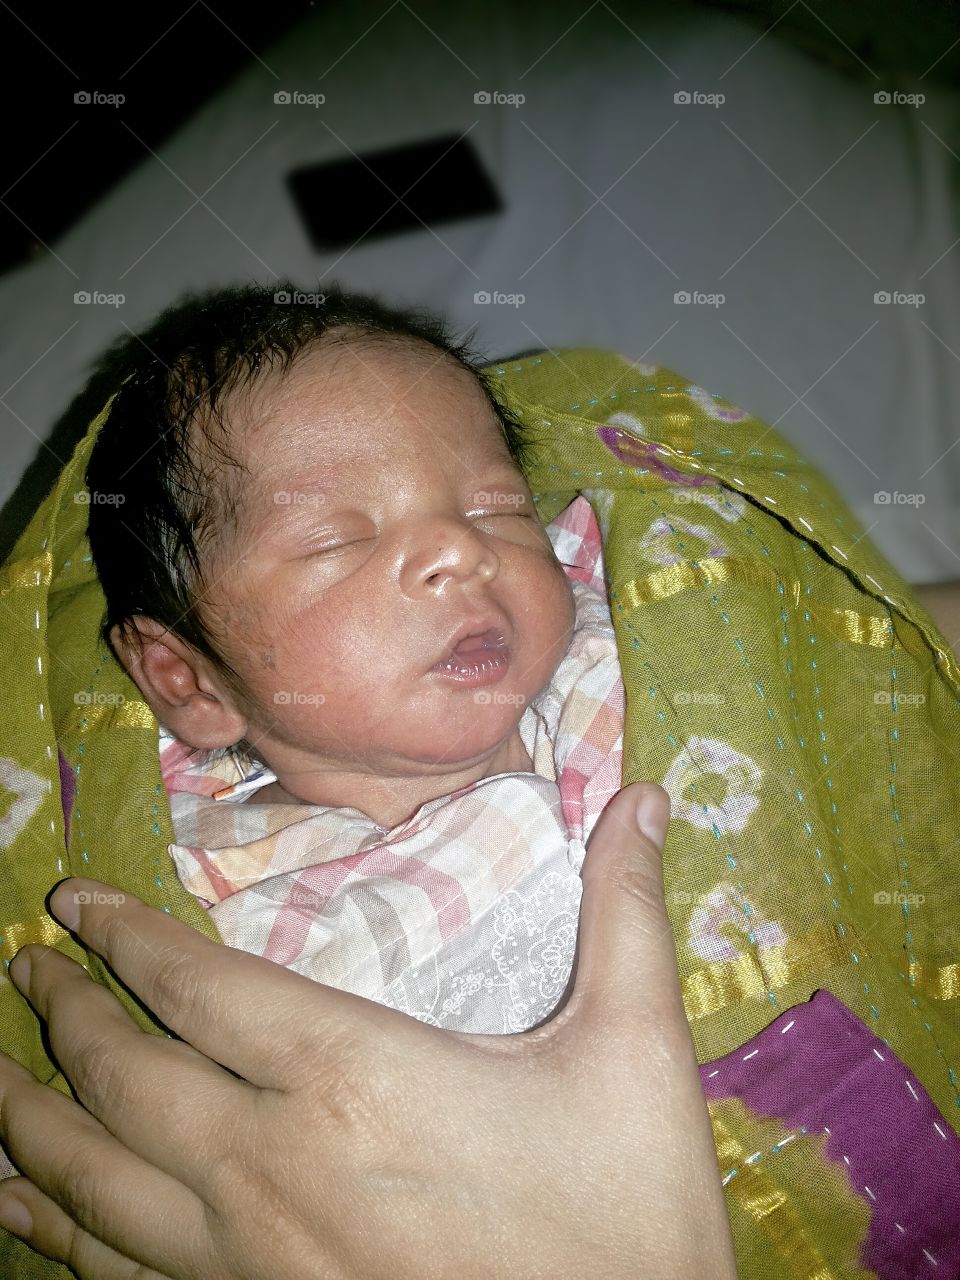 cute new born baby. my cousin's baby